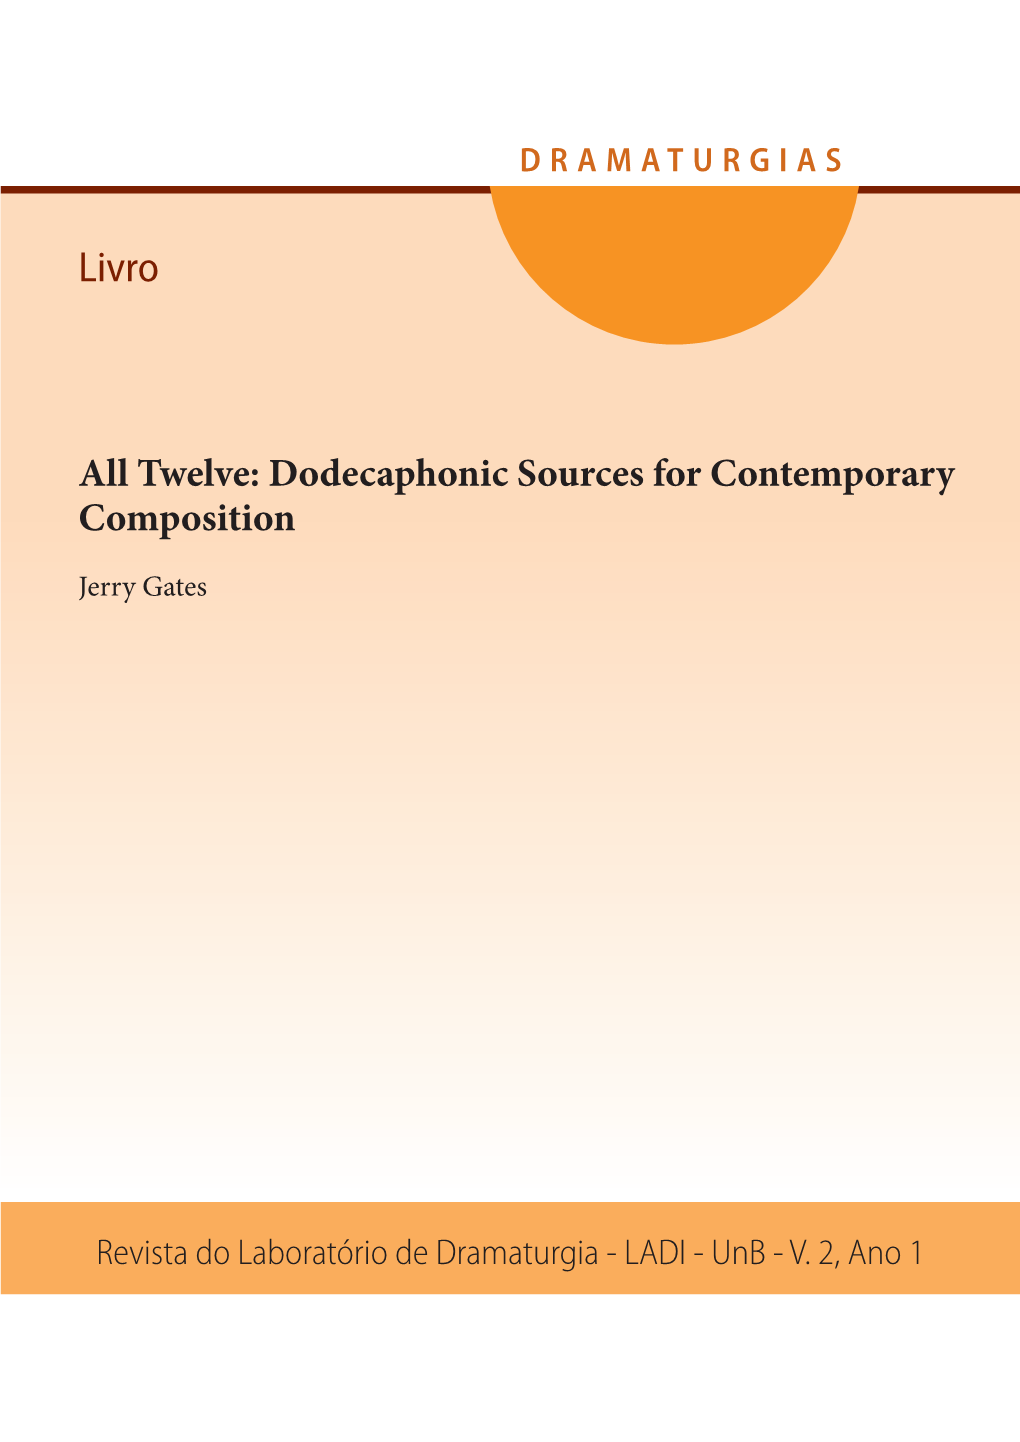 All Twelve: Dodecaphonic Sources for Contemporary Composition